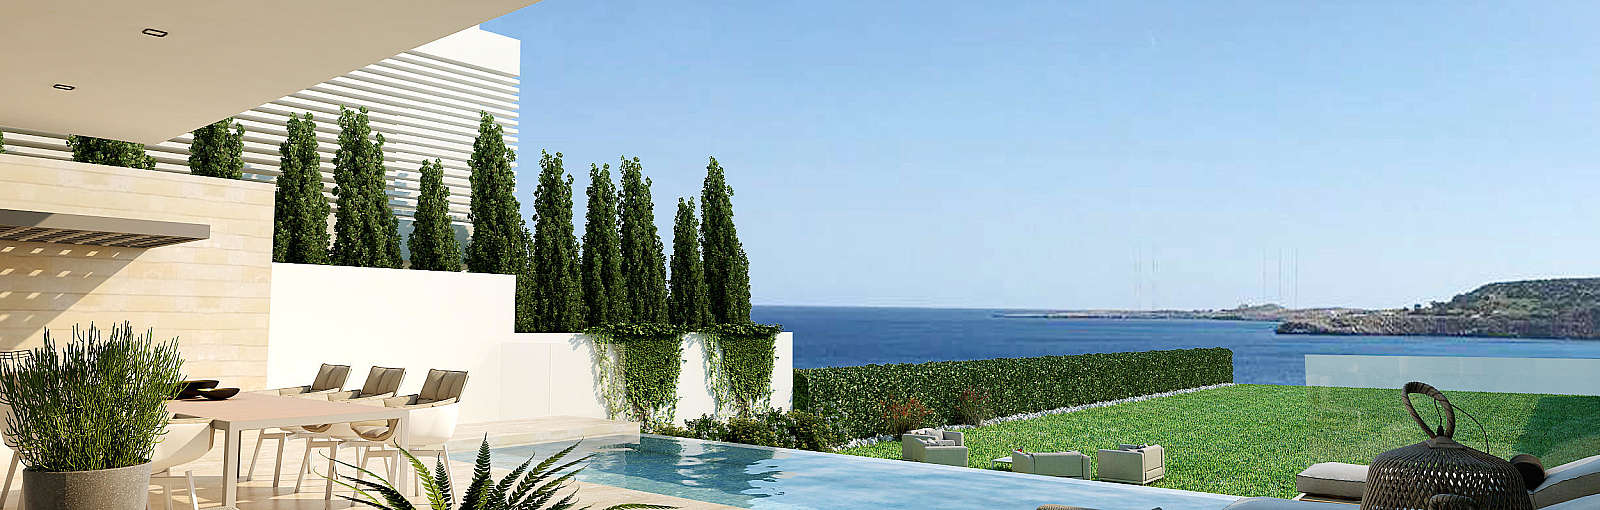 <span class="numbers">3</span> Bed­room Detached Lux­u­ry Sea Front Villa/​Cape&nbsp;Greco